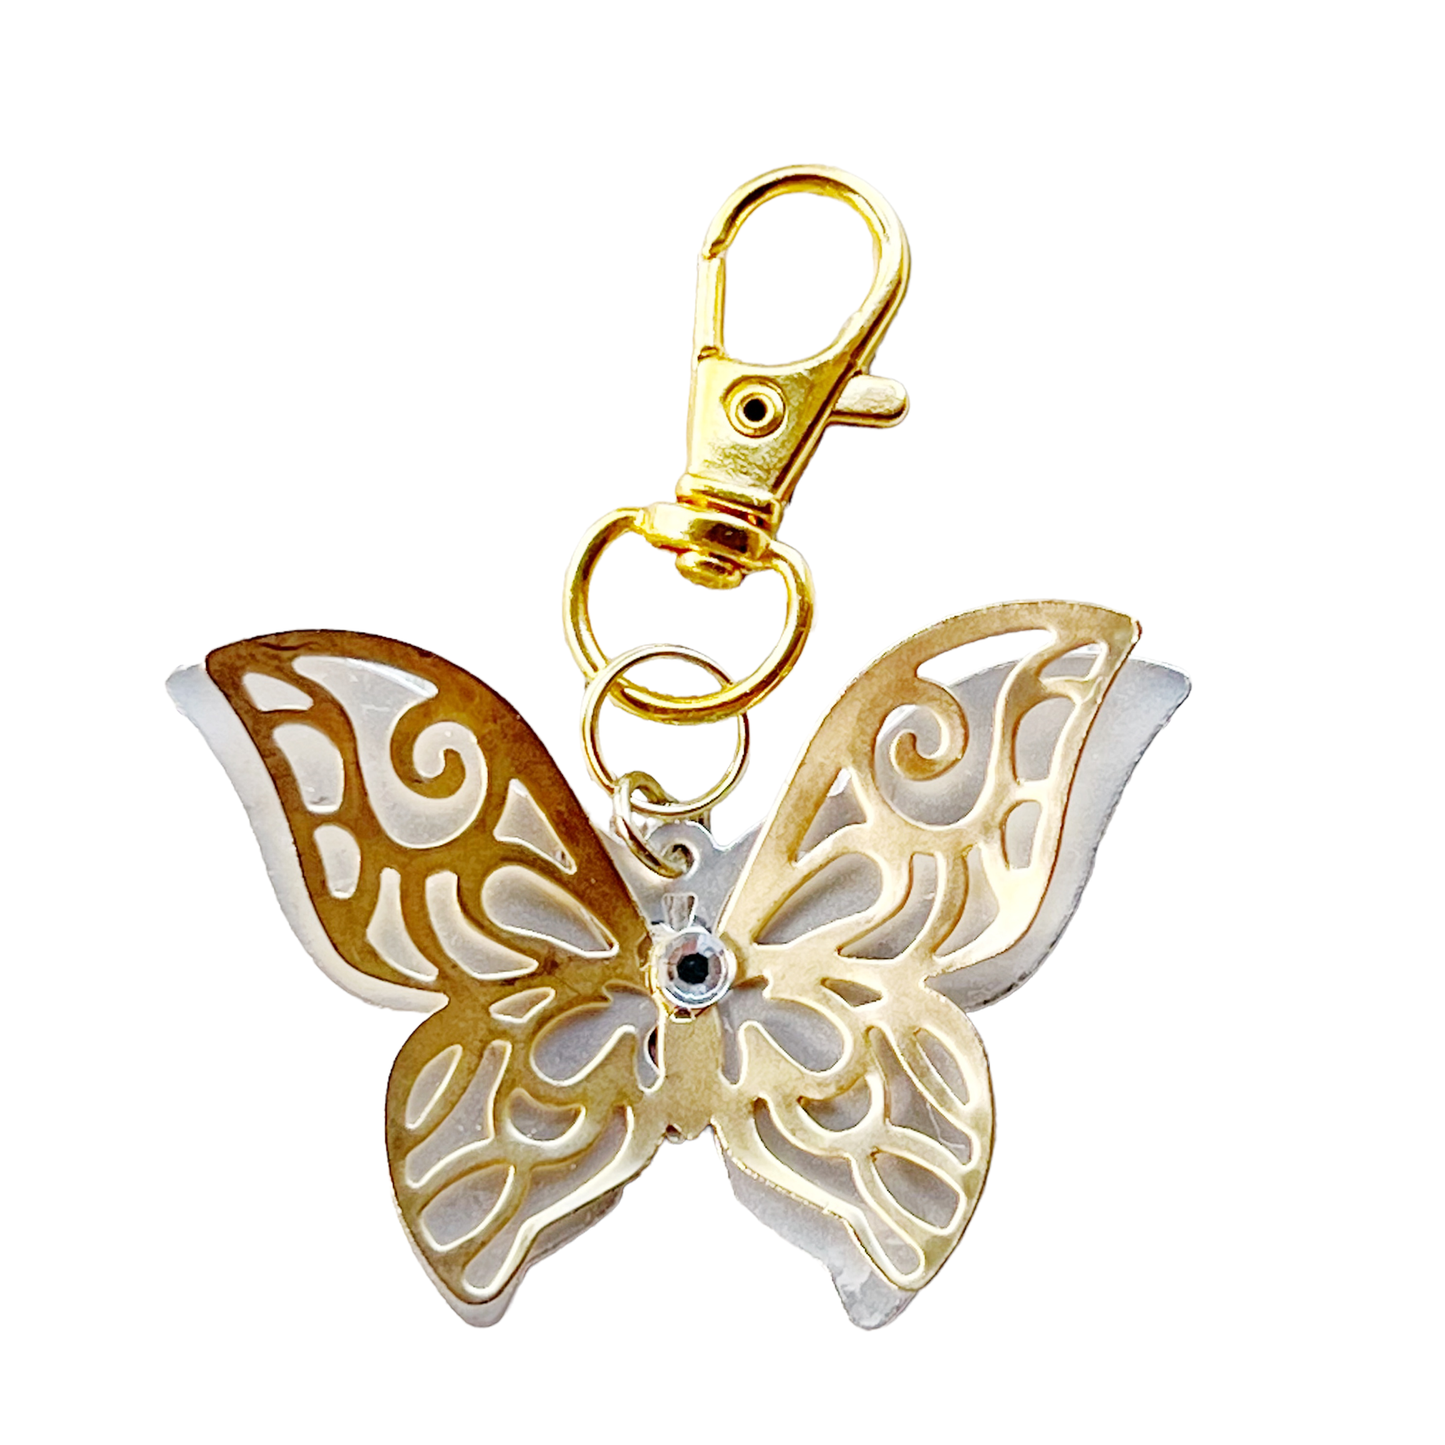 Gold & Silver Butterfly Zipper Pull Keychain Purse Charm with Filigree & Rhinestone Accents - Elegant & Stylish Accessory for Your Bag